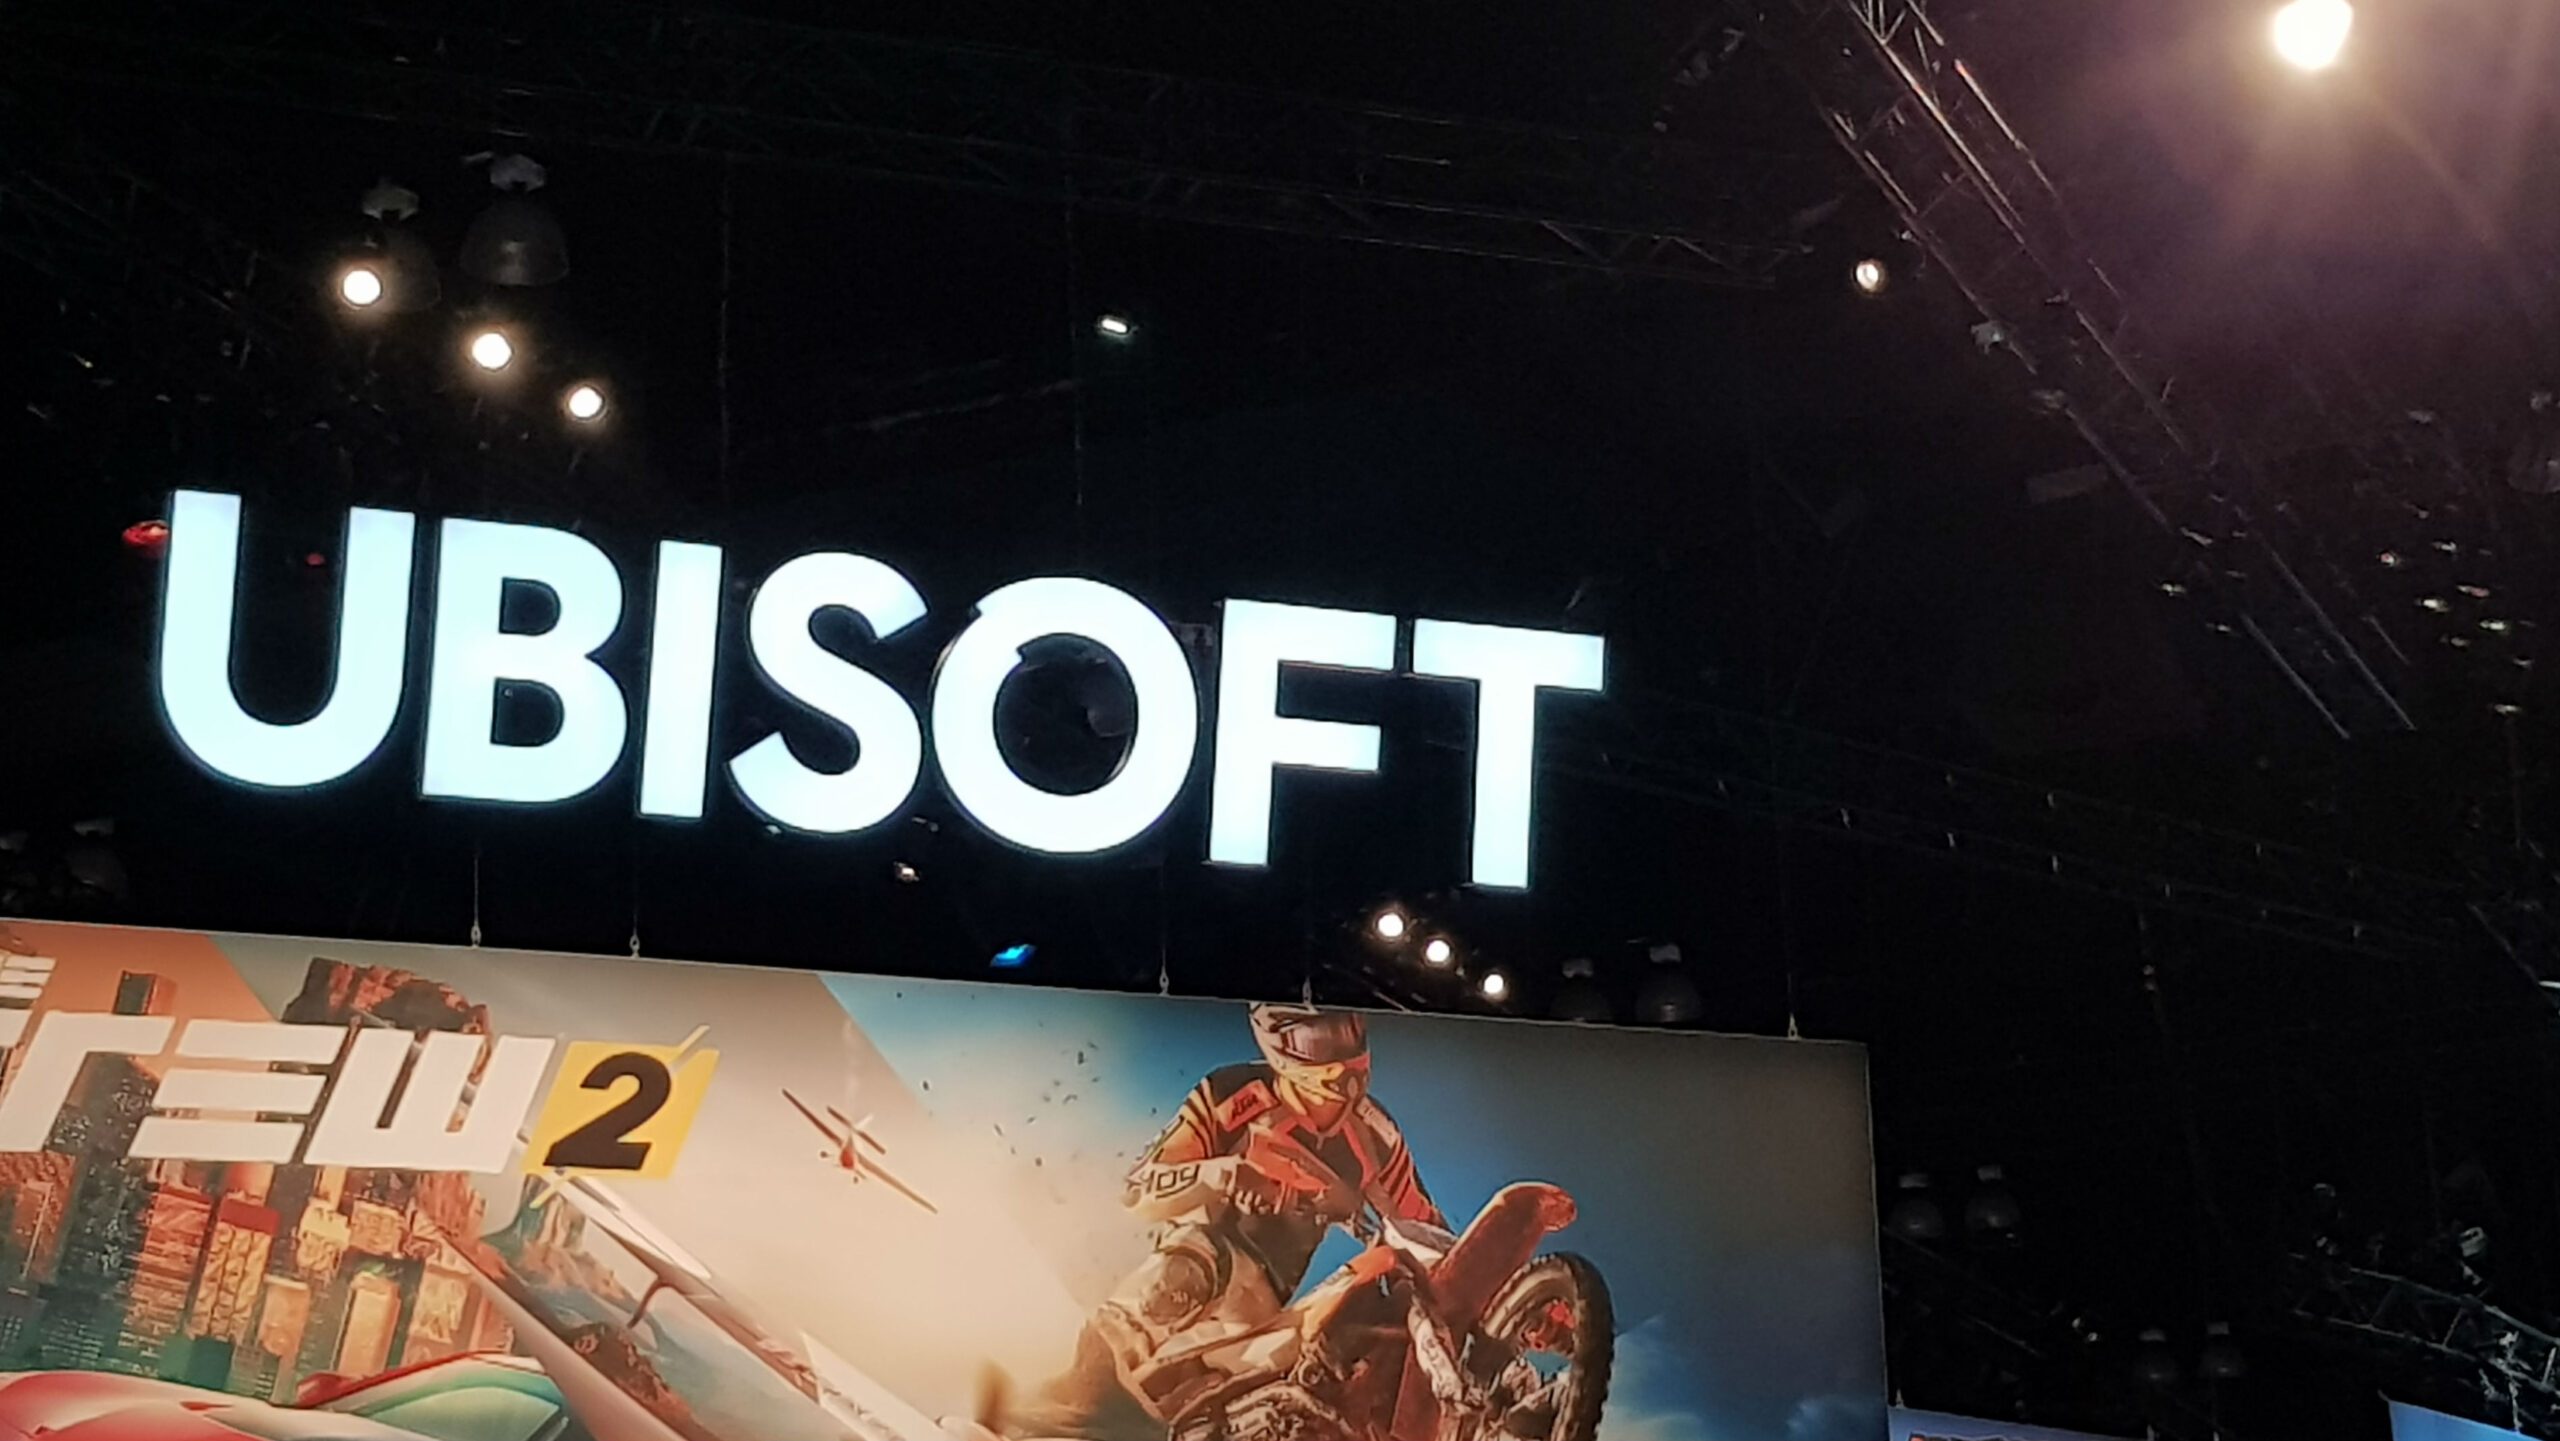 [E3 2017] WATCH: What we saw at the Ubisoft and Natsume booths